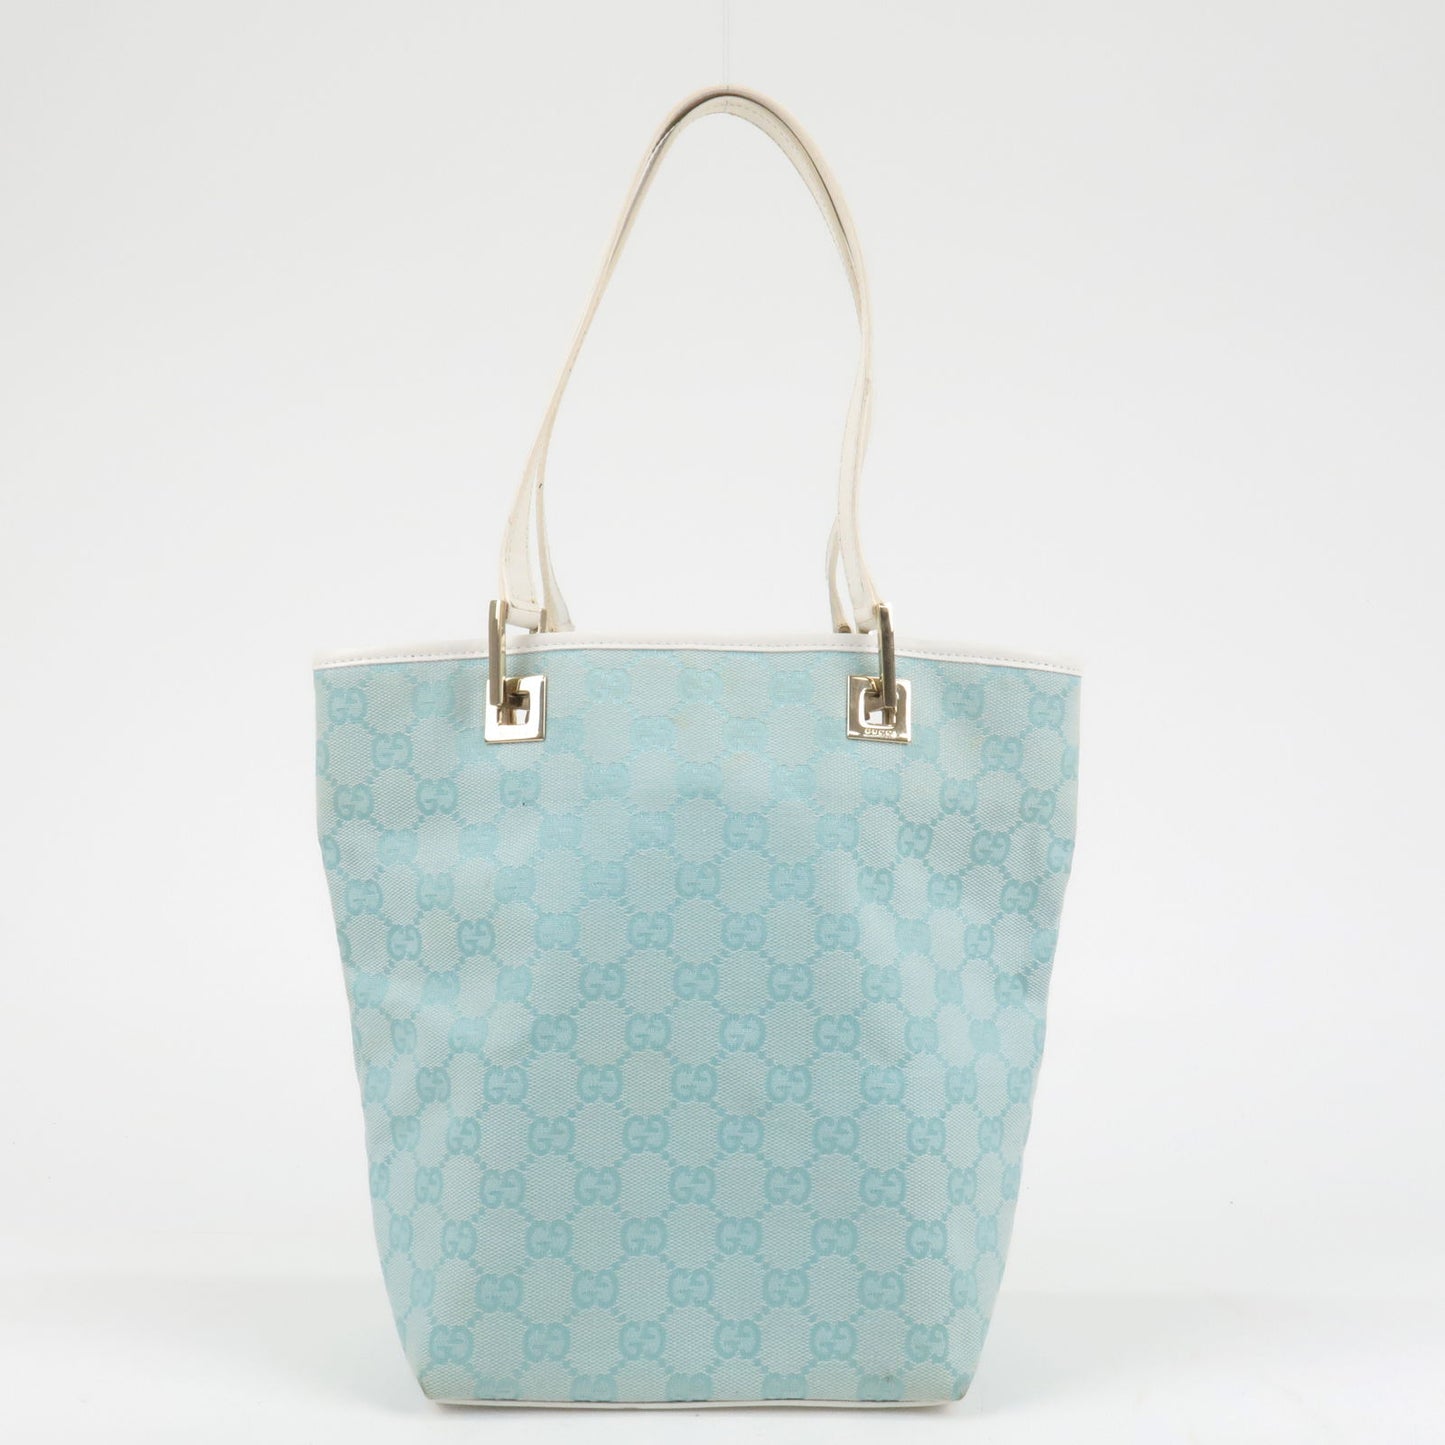 GUCCI GG Canvas Leather Tote Bag Light Blue 002.1099